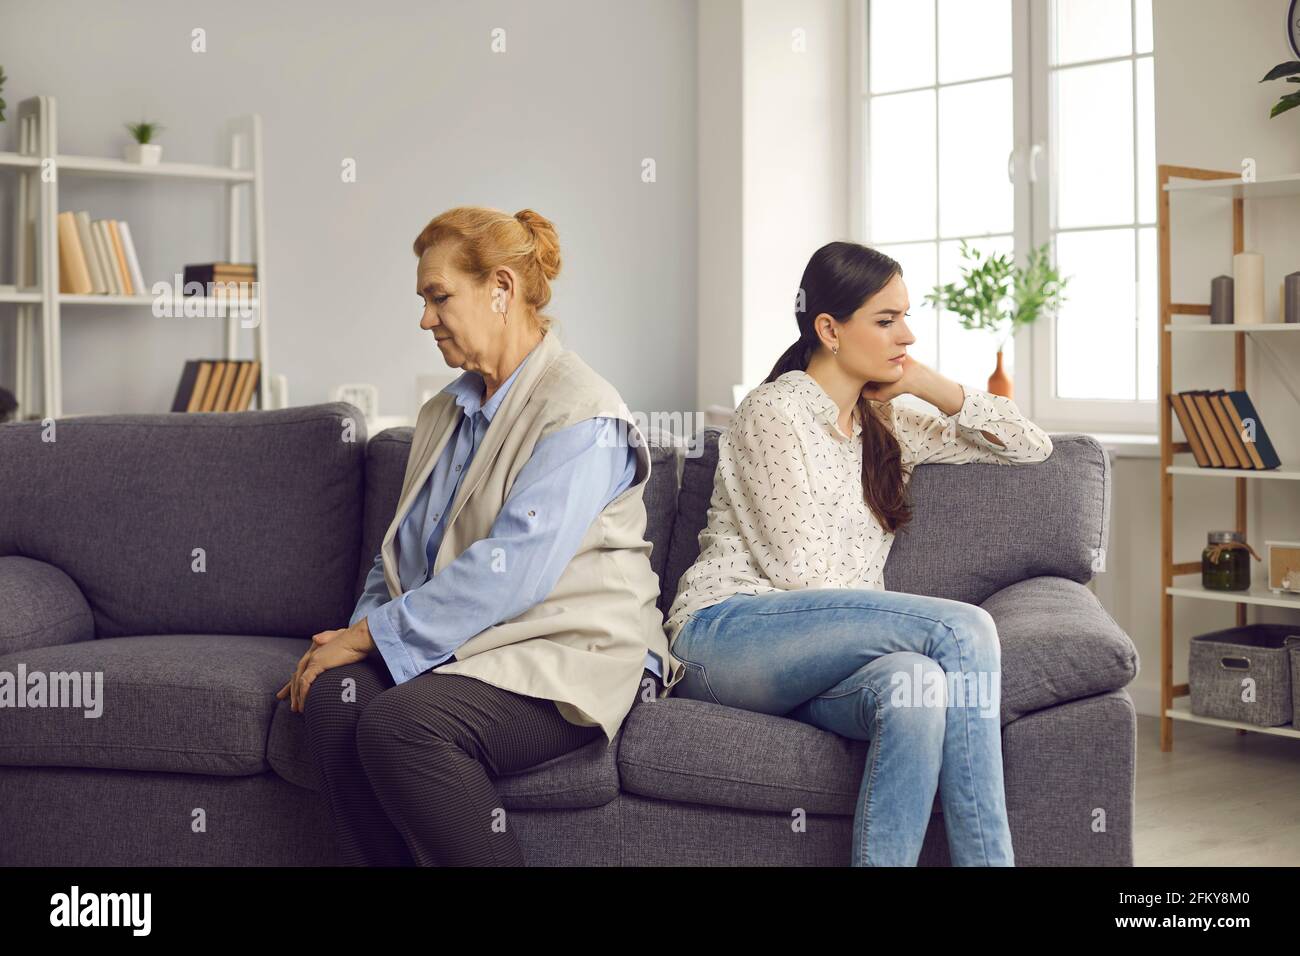 Offended older woman and her adult daughter are sitting on the couch with their backs to each other. Stock Photo